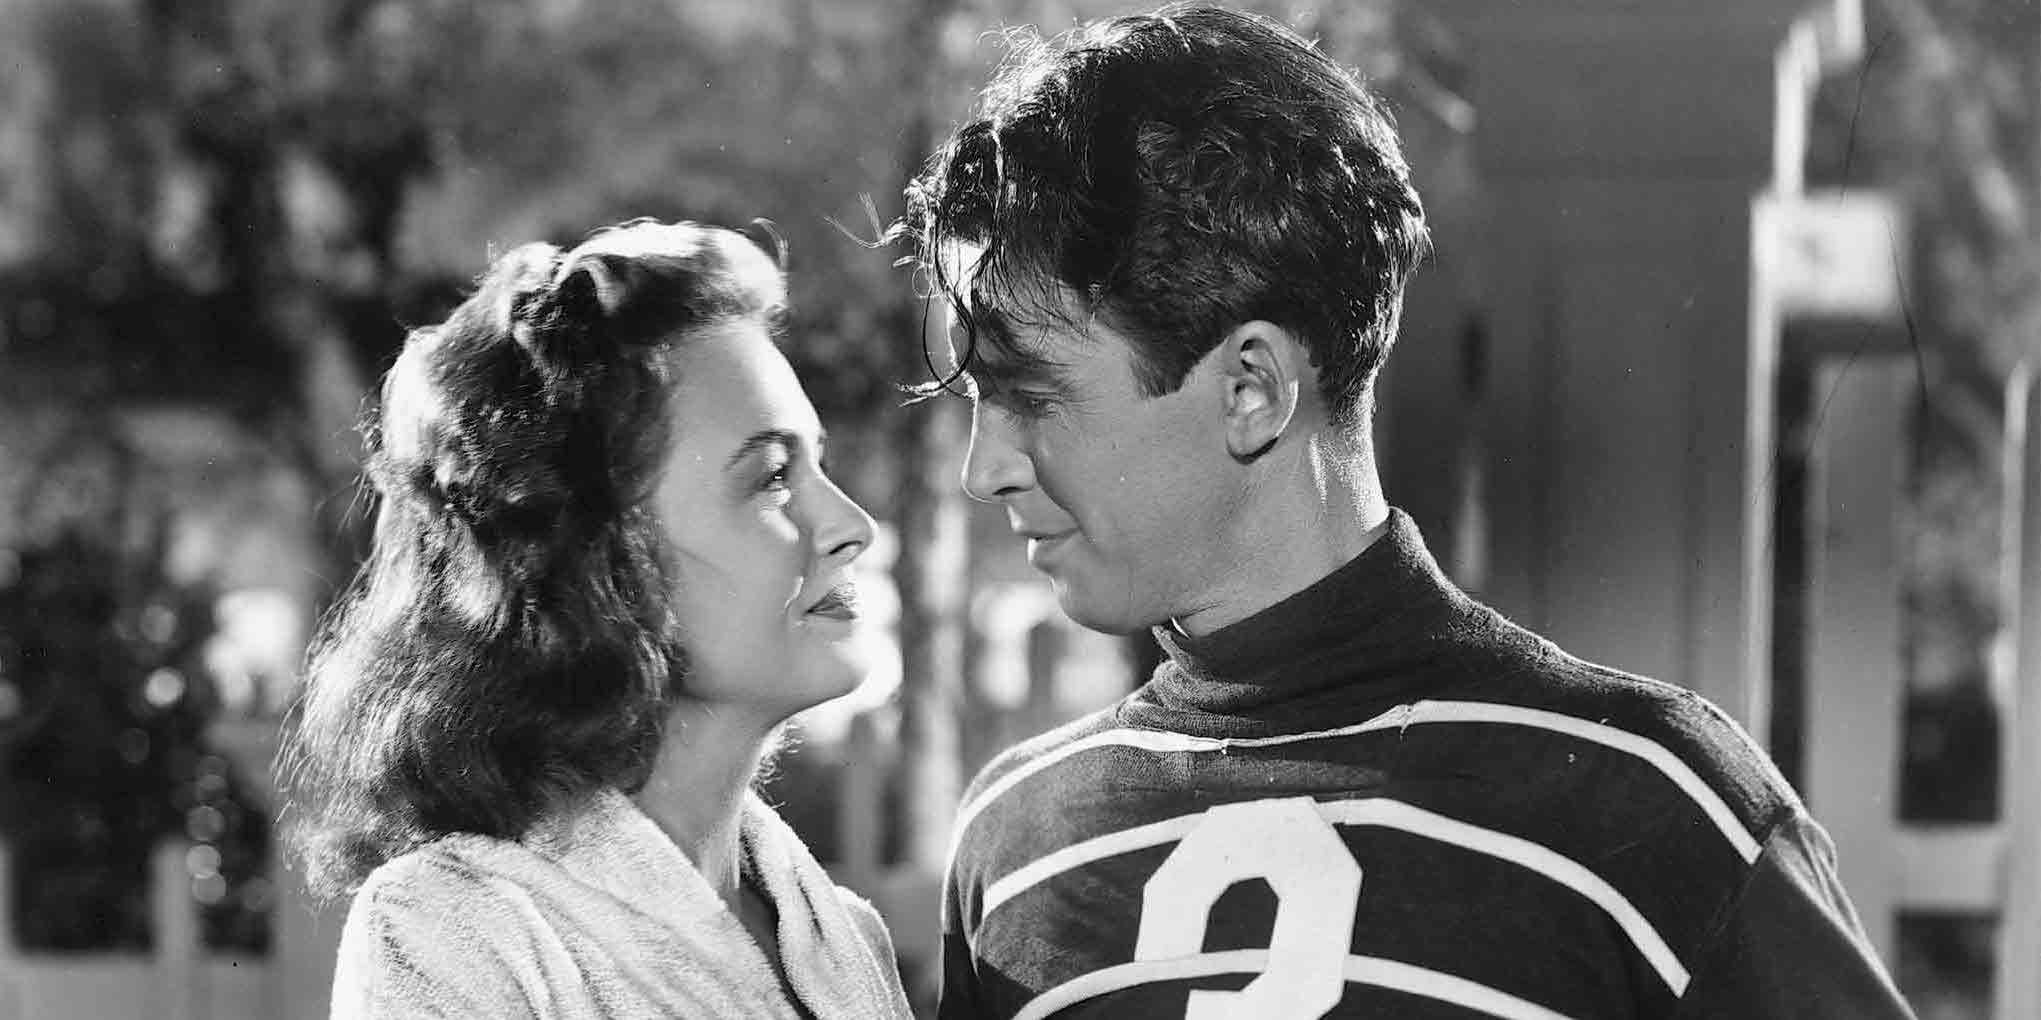 It's a Wonderful Life (1946) Directed by Frank Capra Shown from left: Donna Reed, James Stewart